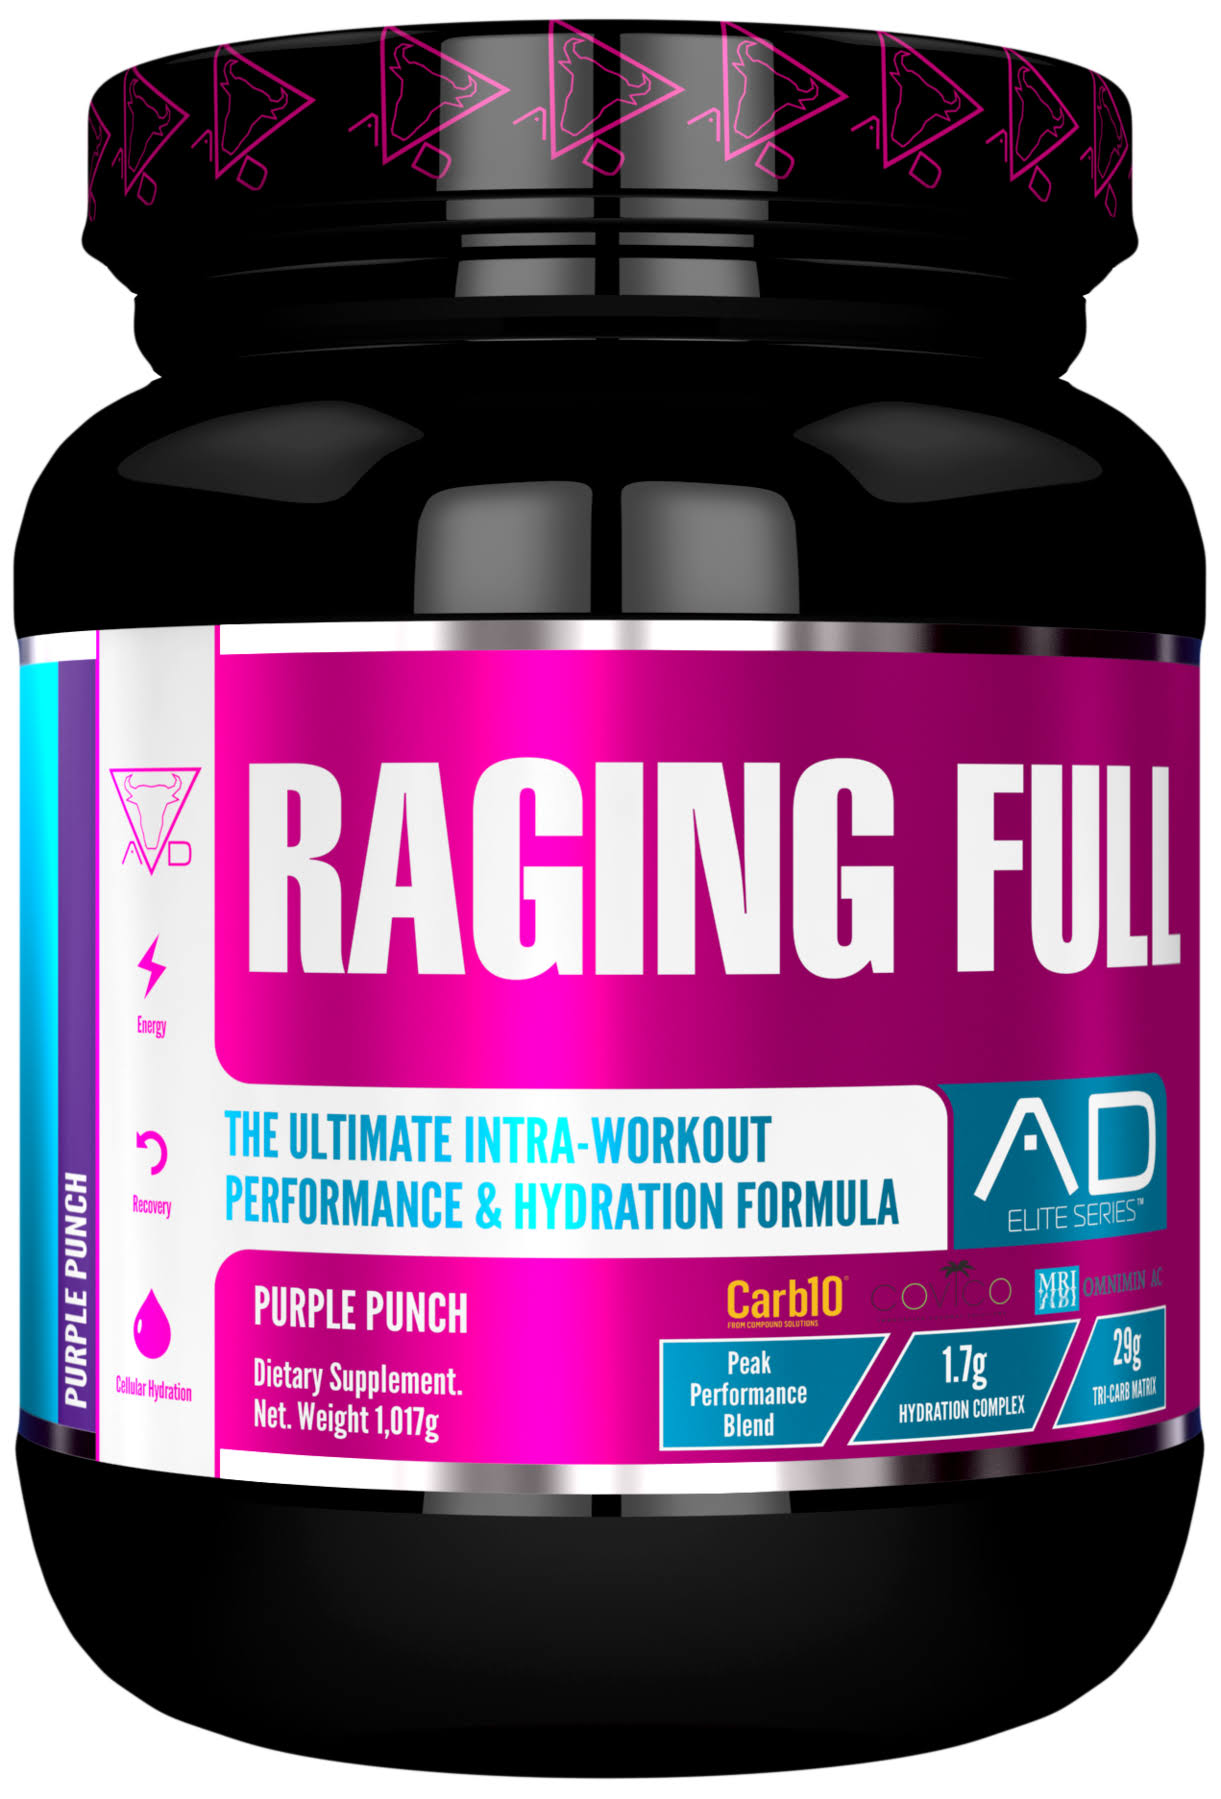 Project Ad | Raging Full 30 Servings - Purple Punch